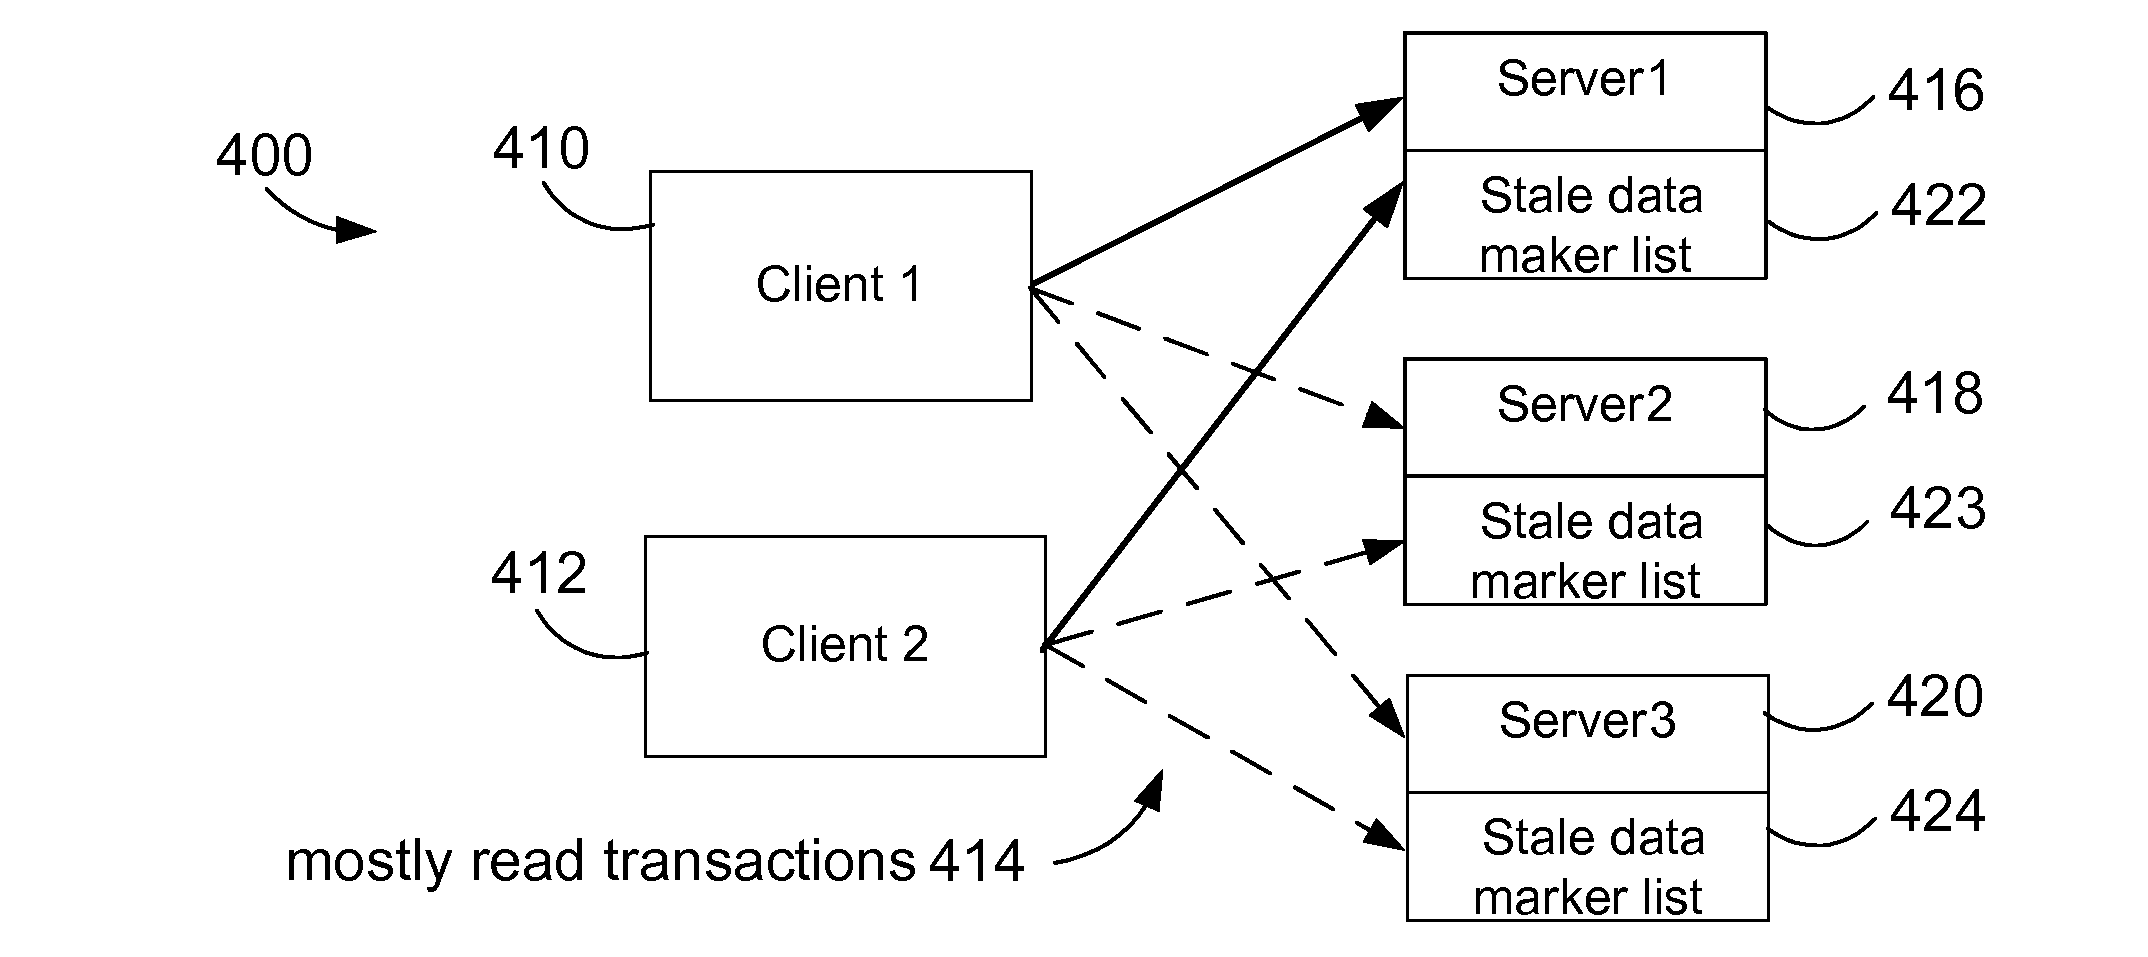 Efficient handling of mostly read data in a computer server